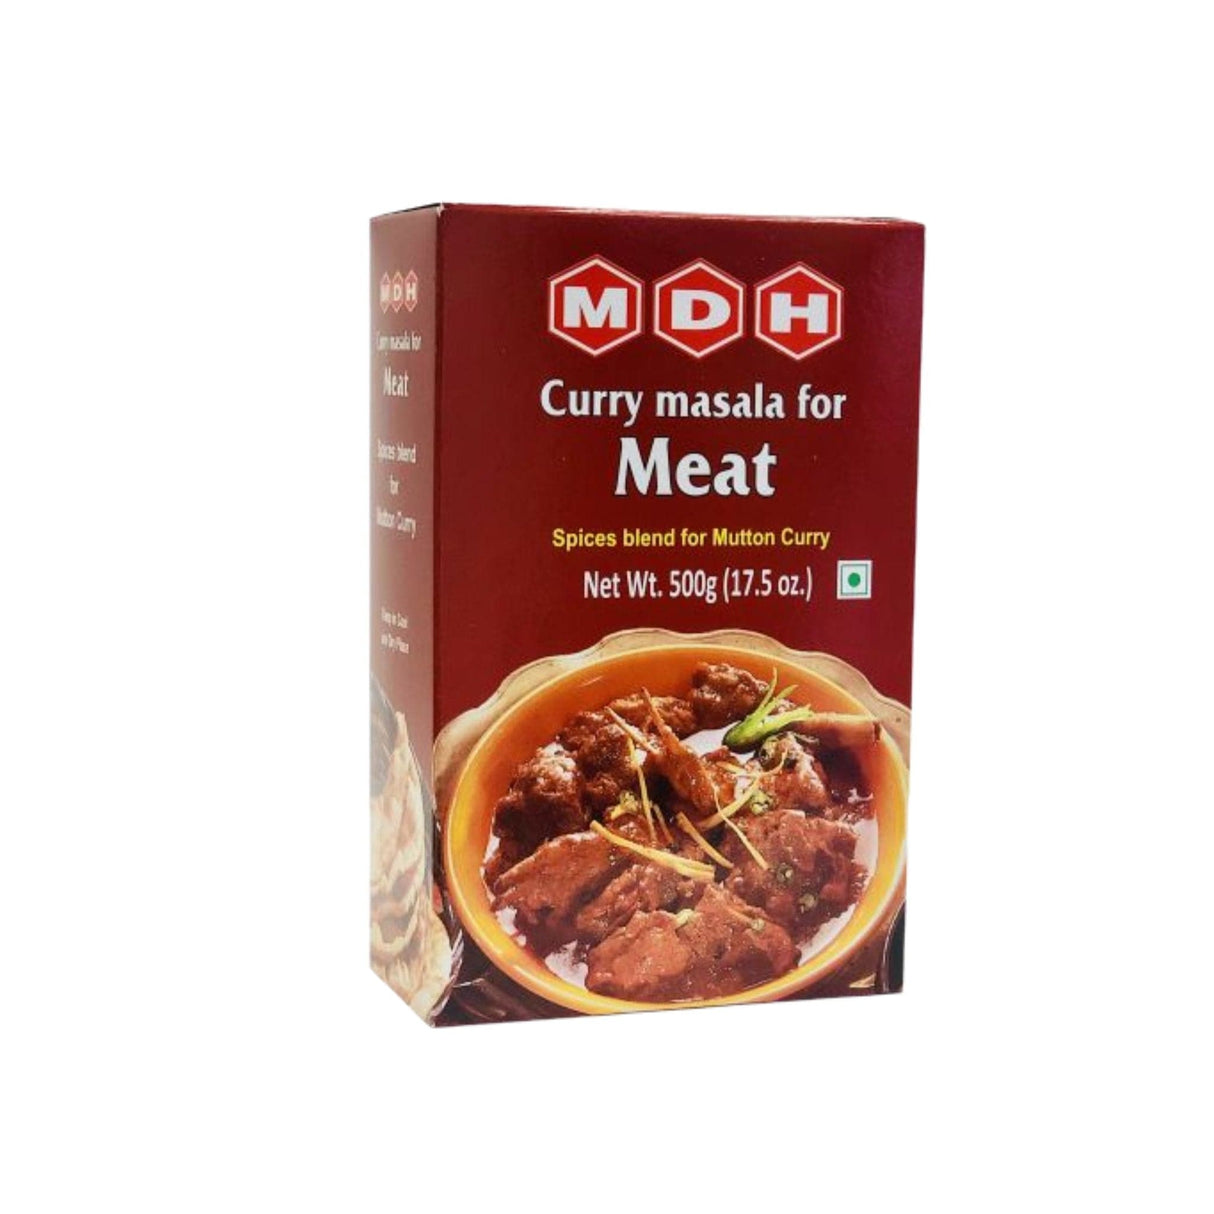 MDH Curry Masala for Meat - hot sauce market & more